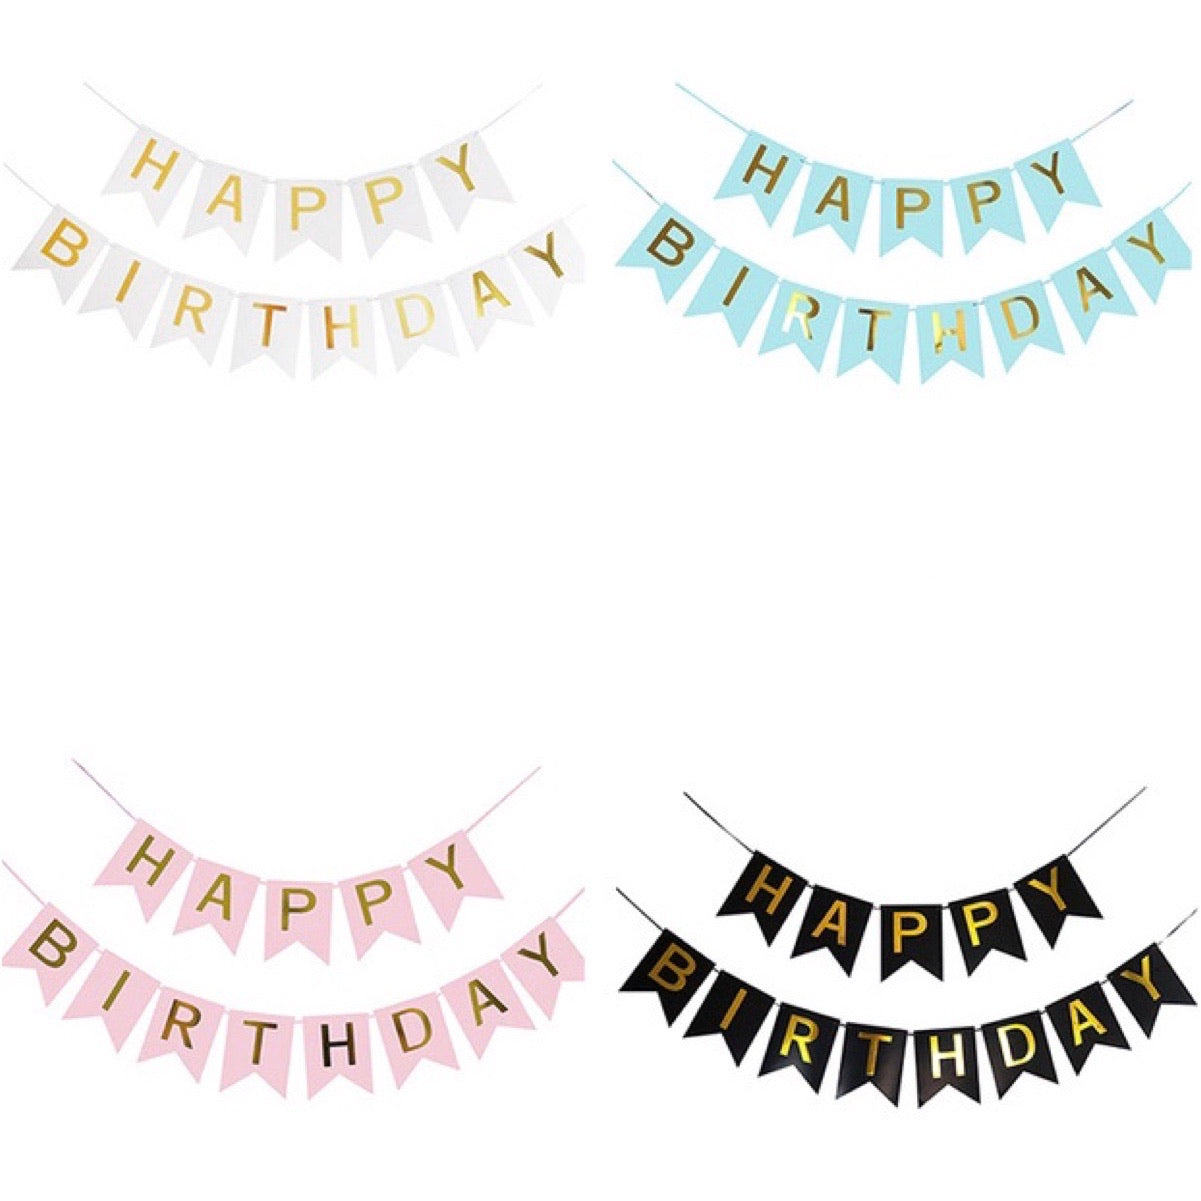 Classic Happy Birthday Lettering Banner/ Bunting